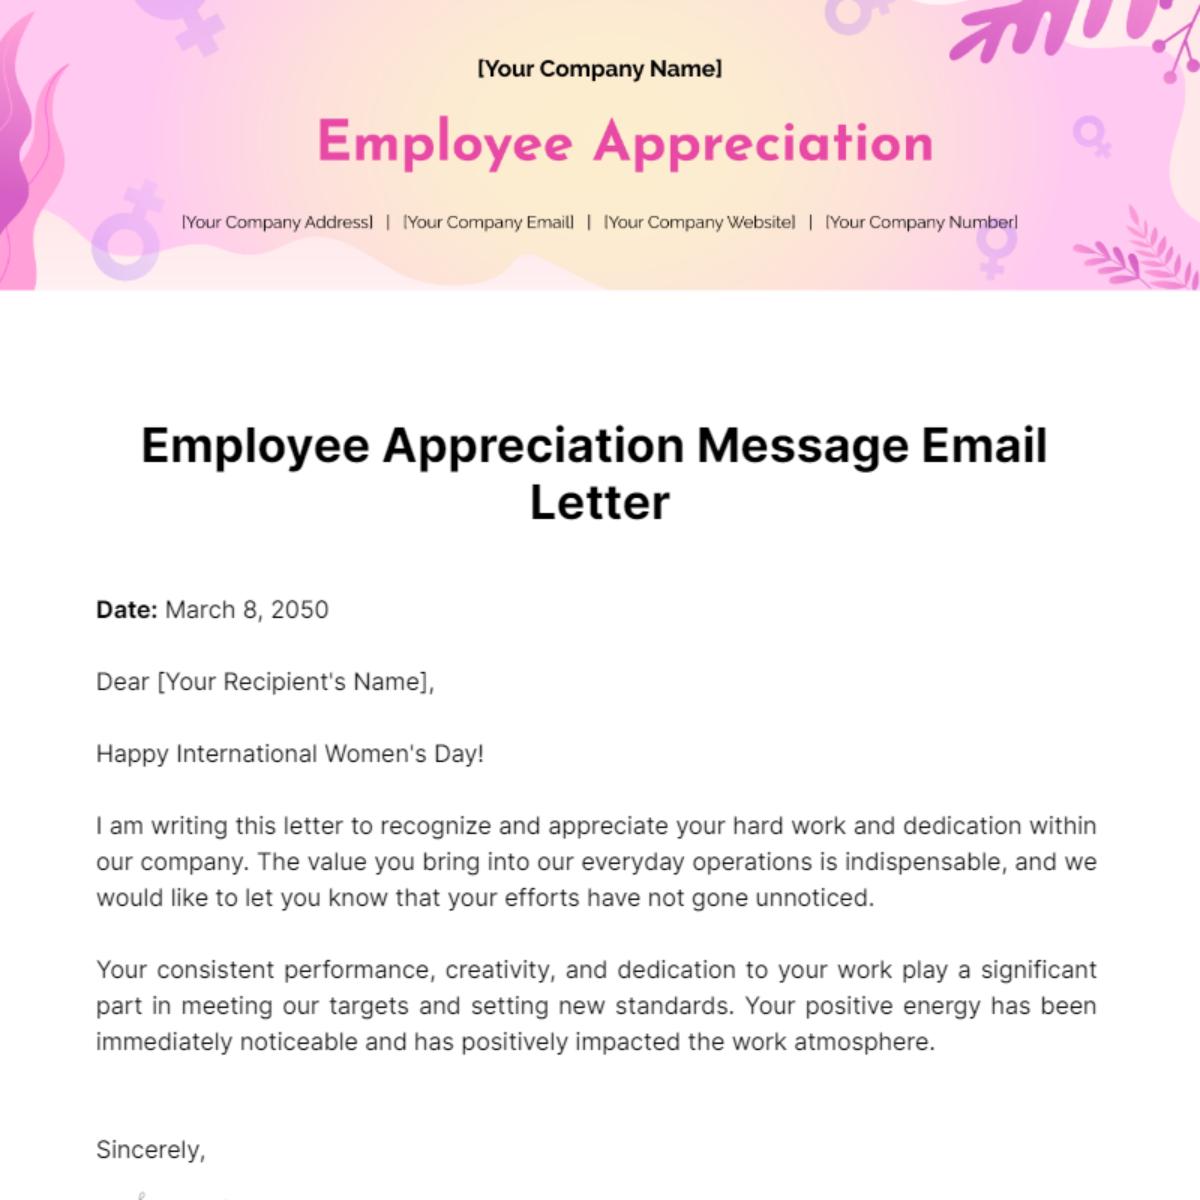 Employee Appreciation Message Email Letter Template